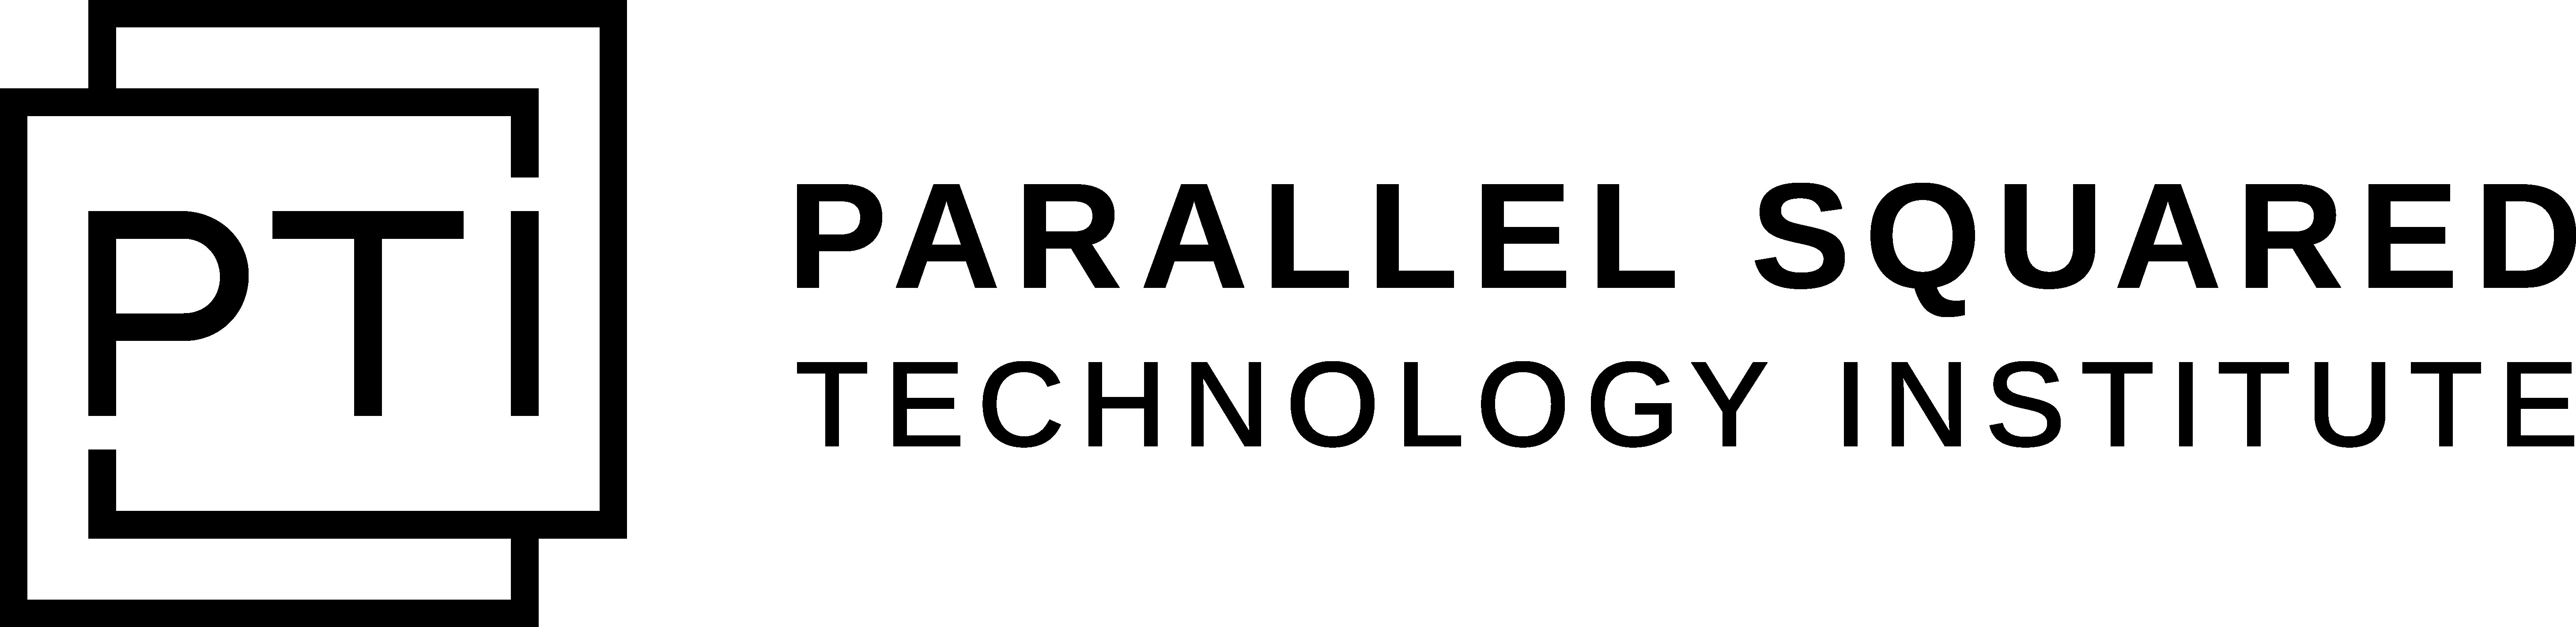 Parallel Squared Technology Institute